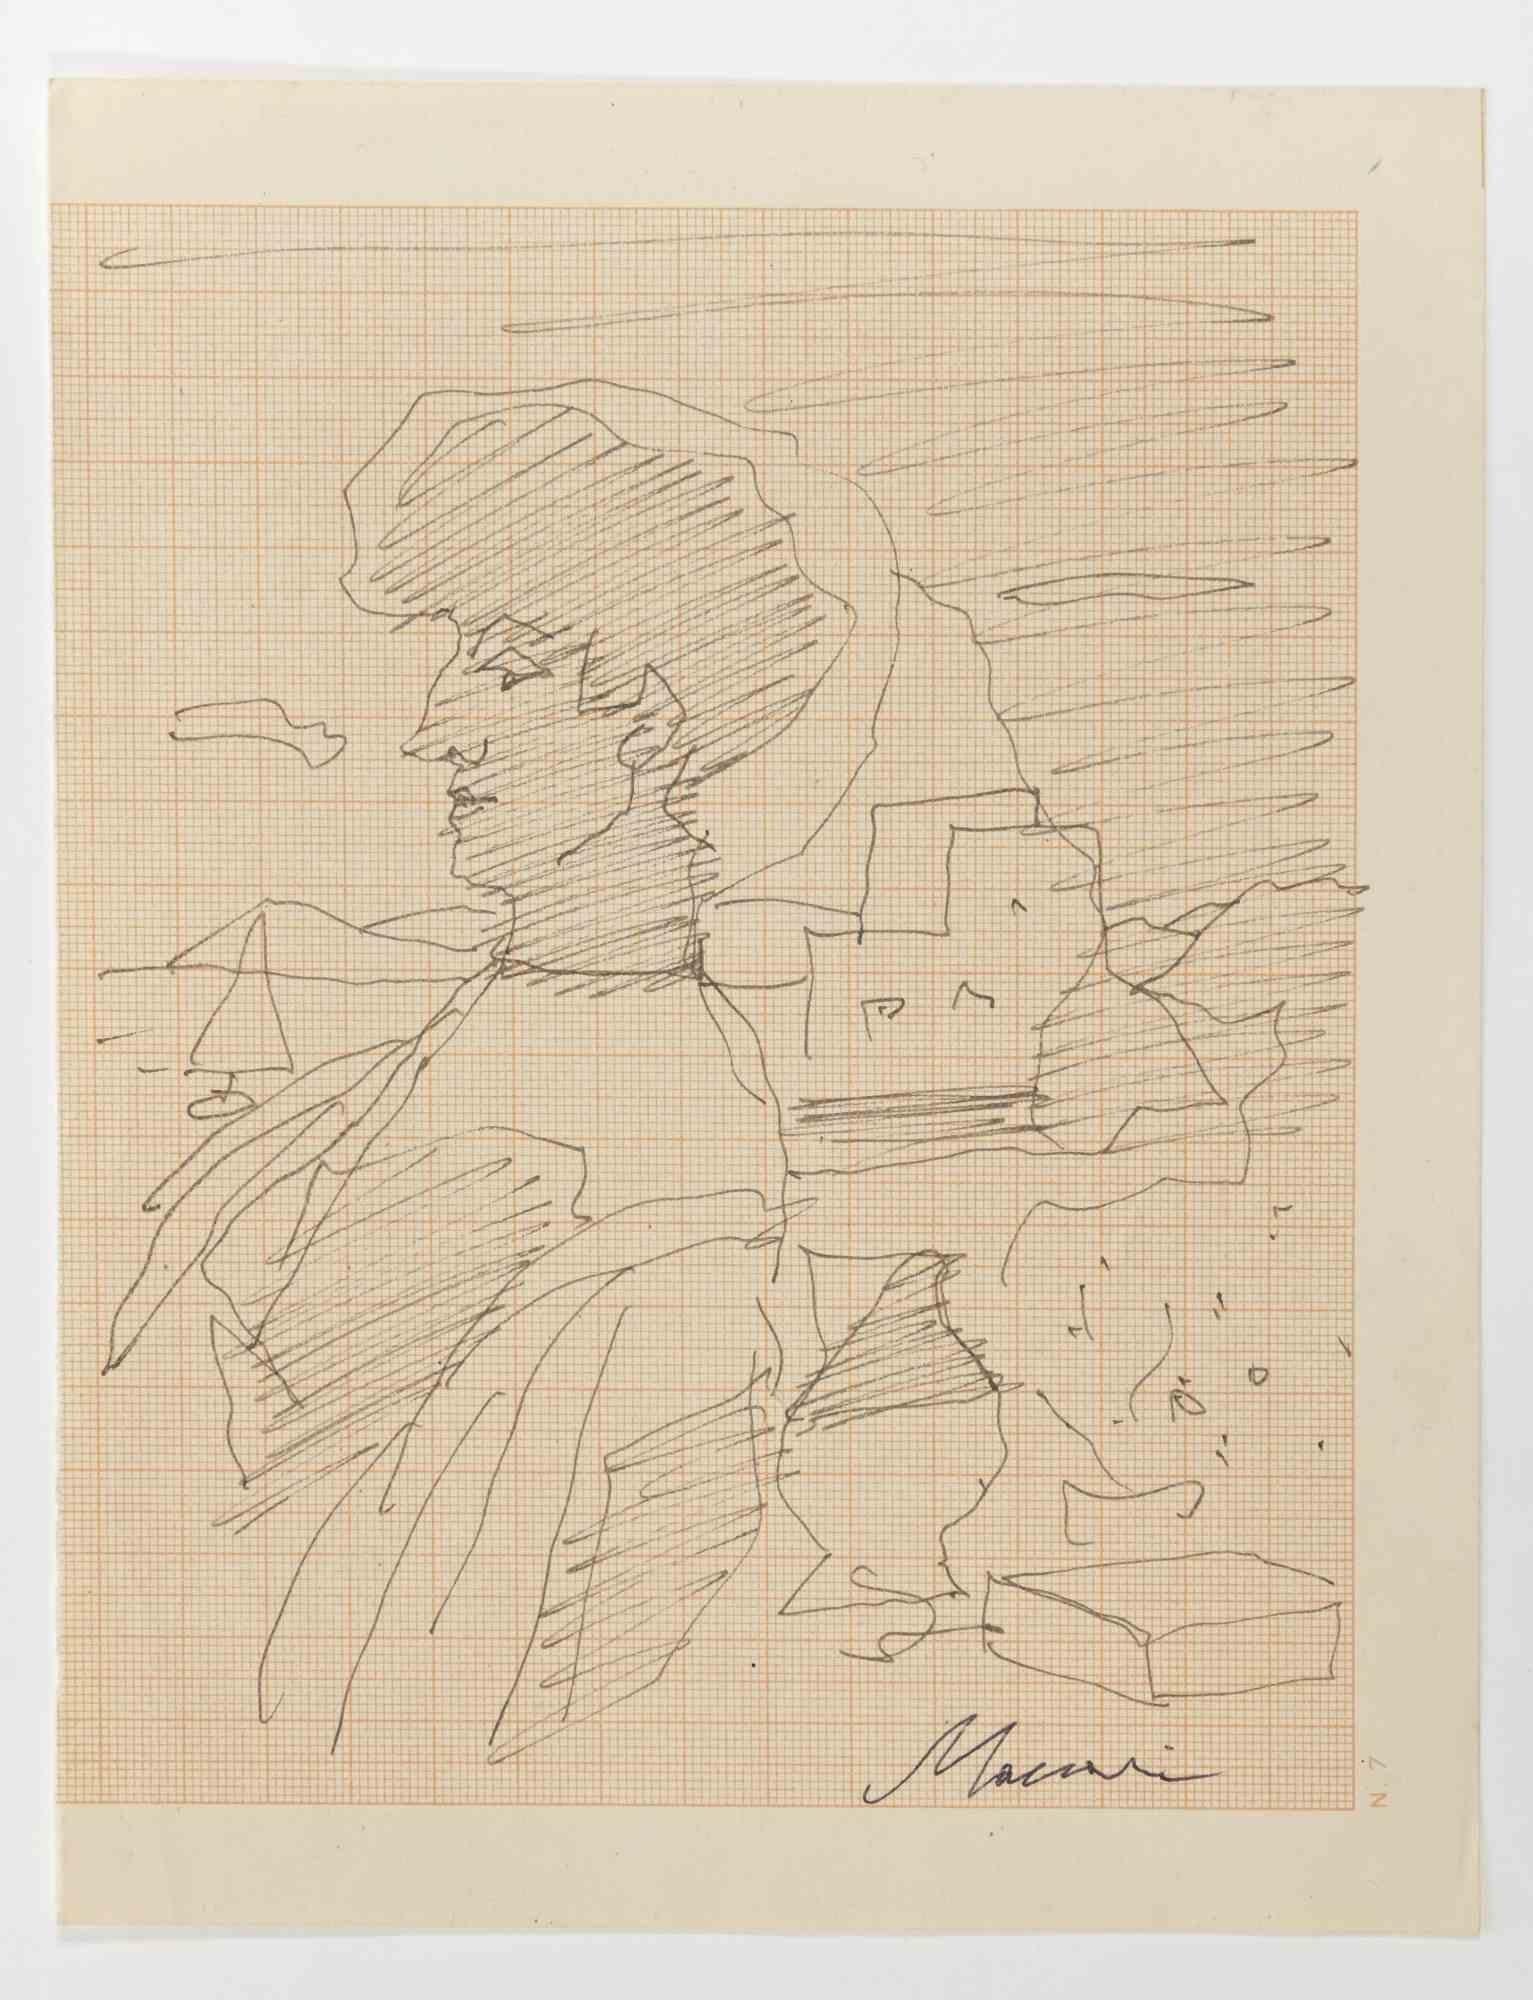 Woman in The Landscape - Drawing by Mino Maccari - 1960s